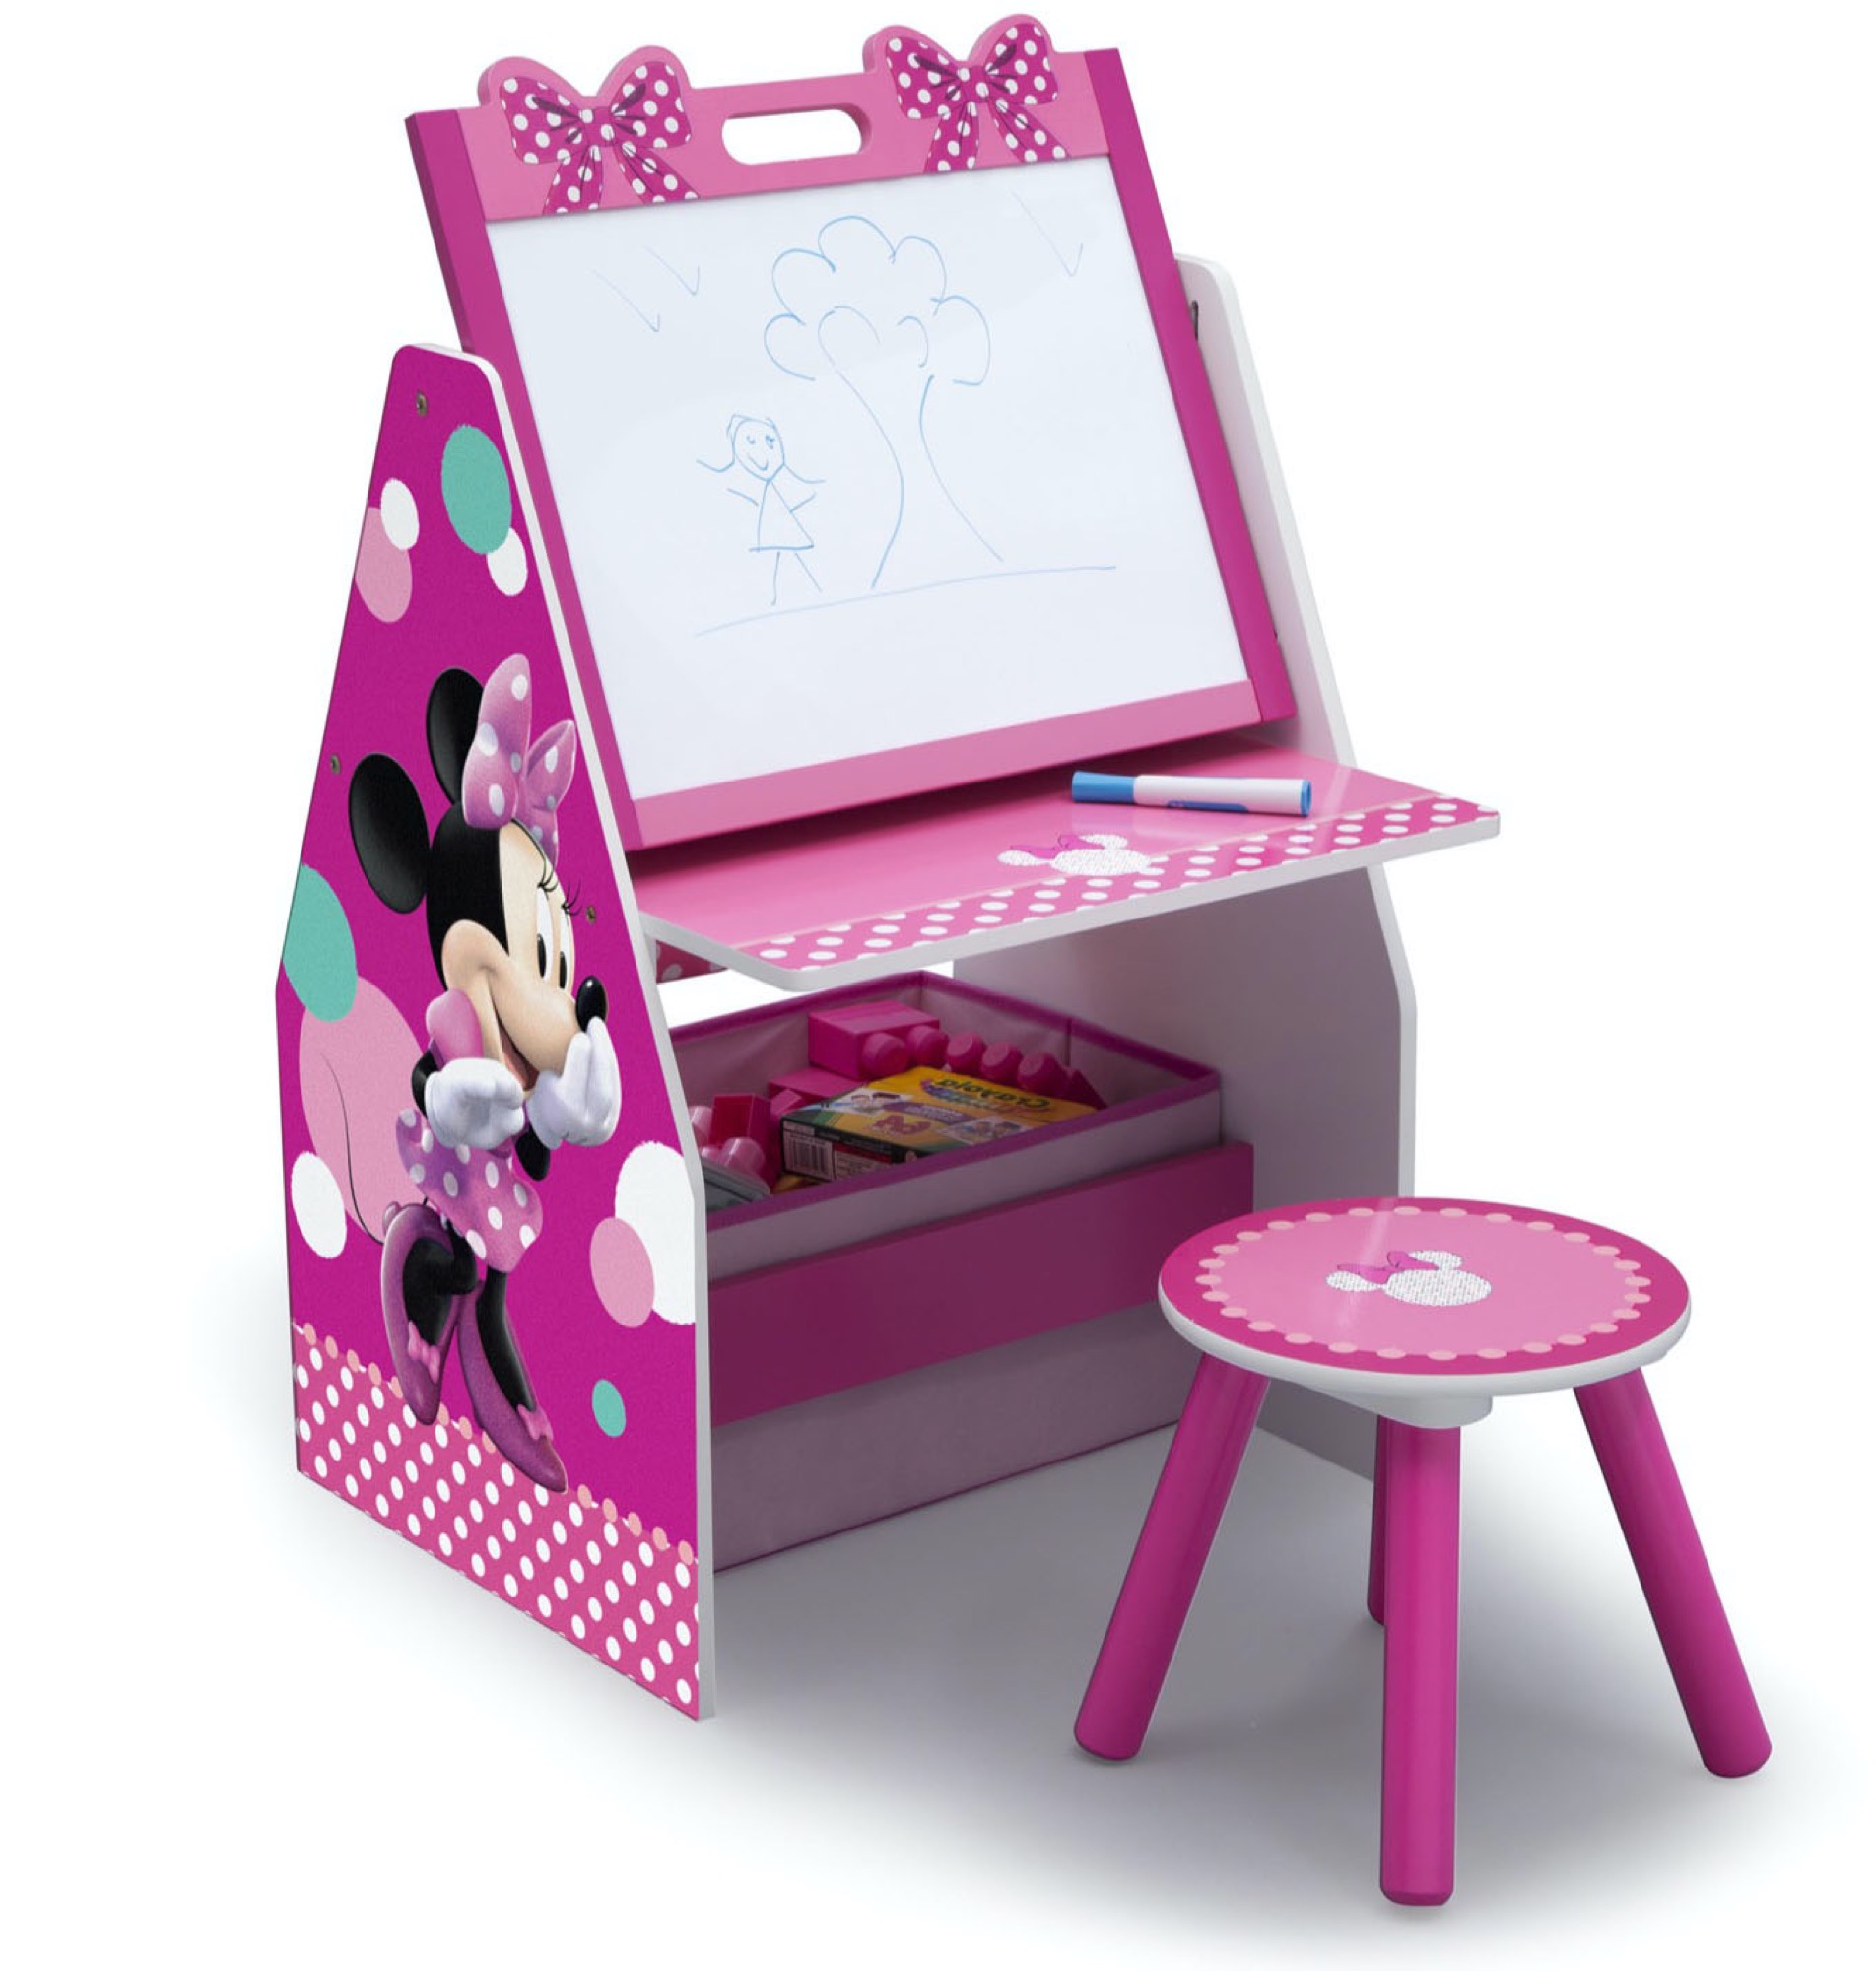 Disney Minnie Mouse Deluxe Kids Art Table, Easel, Desk, Stool & Toy Organizer, Greenguard Gold Certified - image 1 of 10